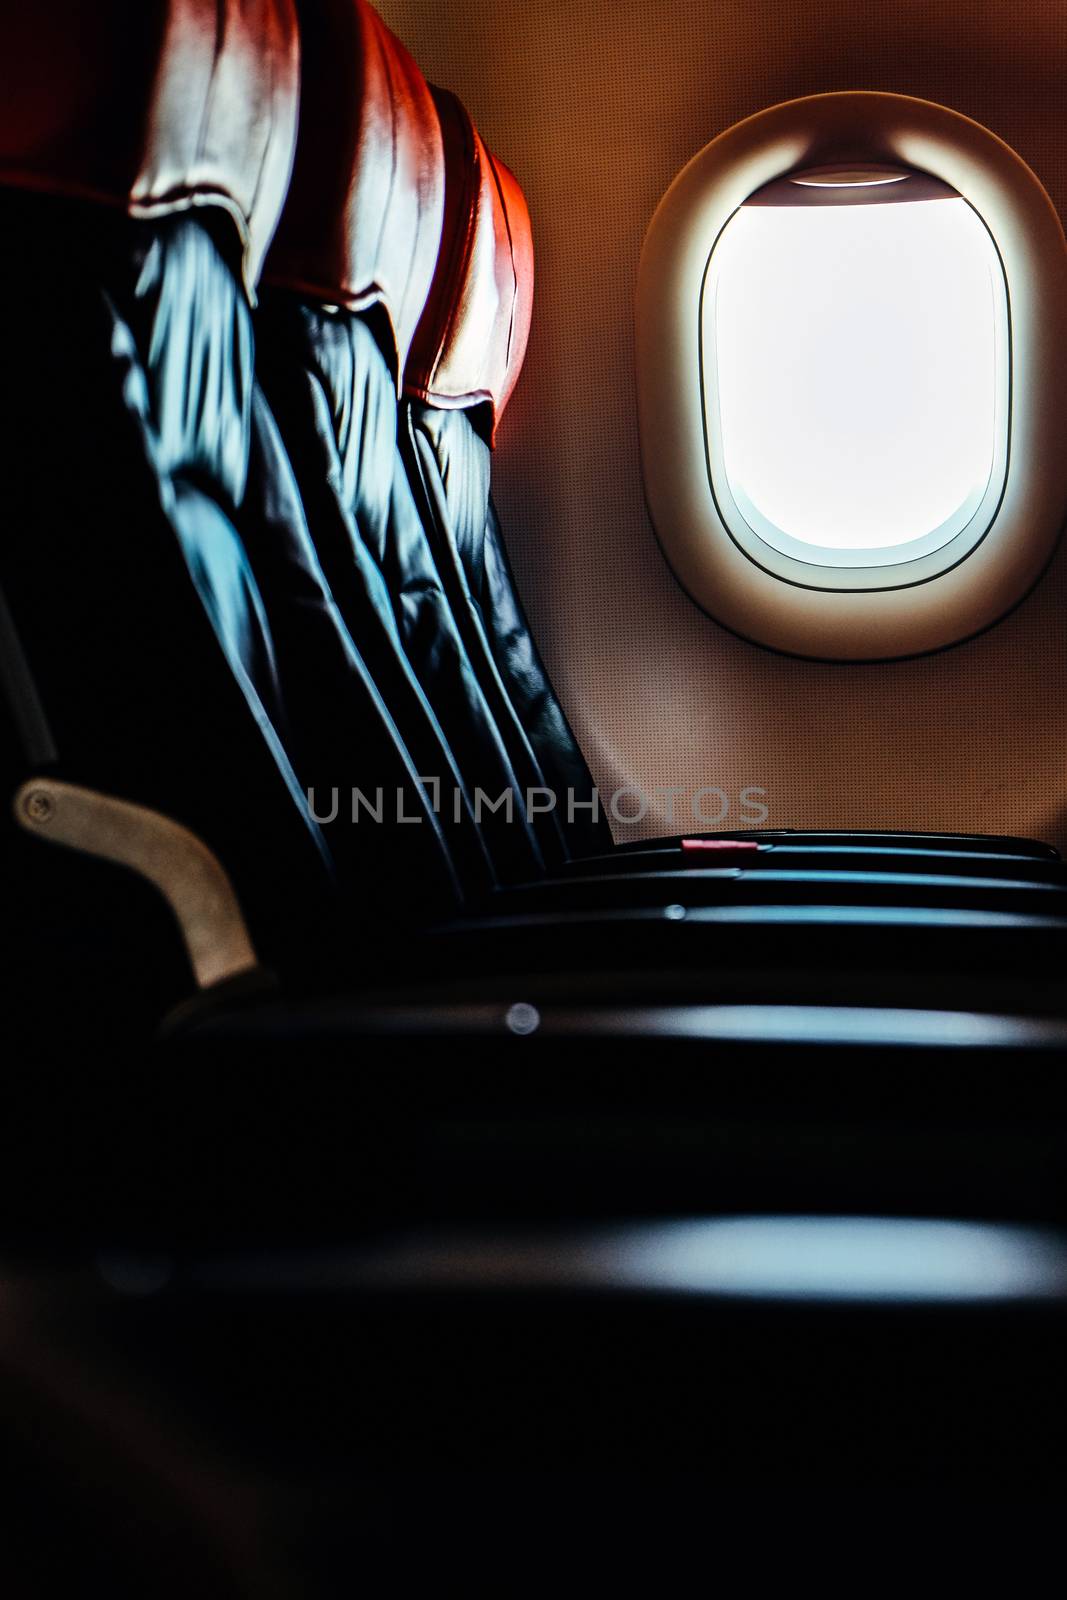 Seats in economy class section of airplane by ponsulak